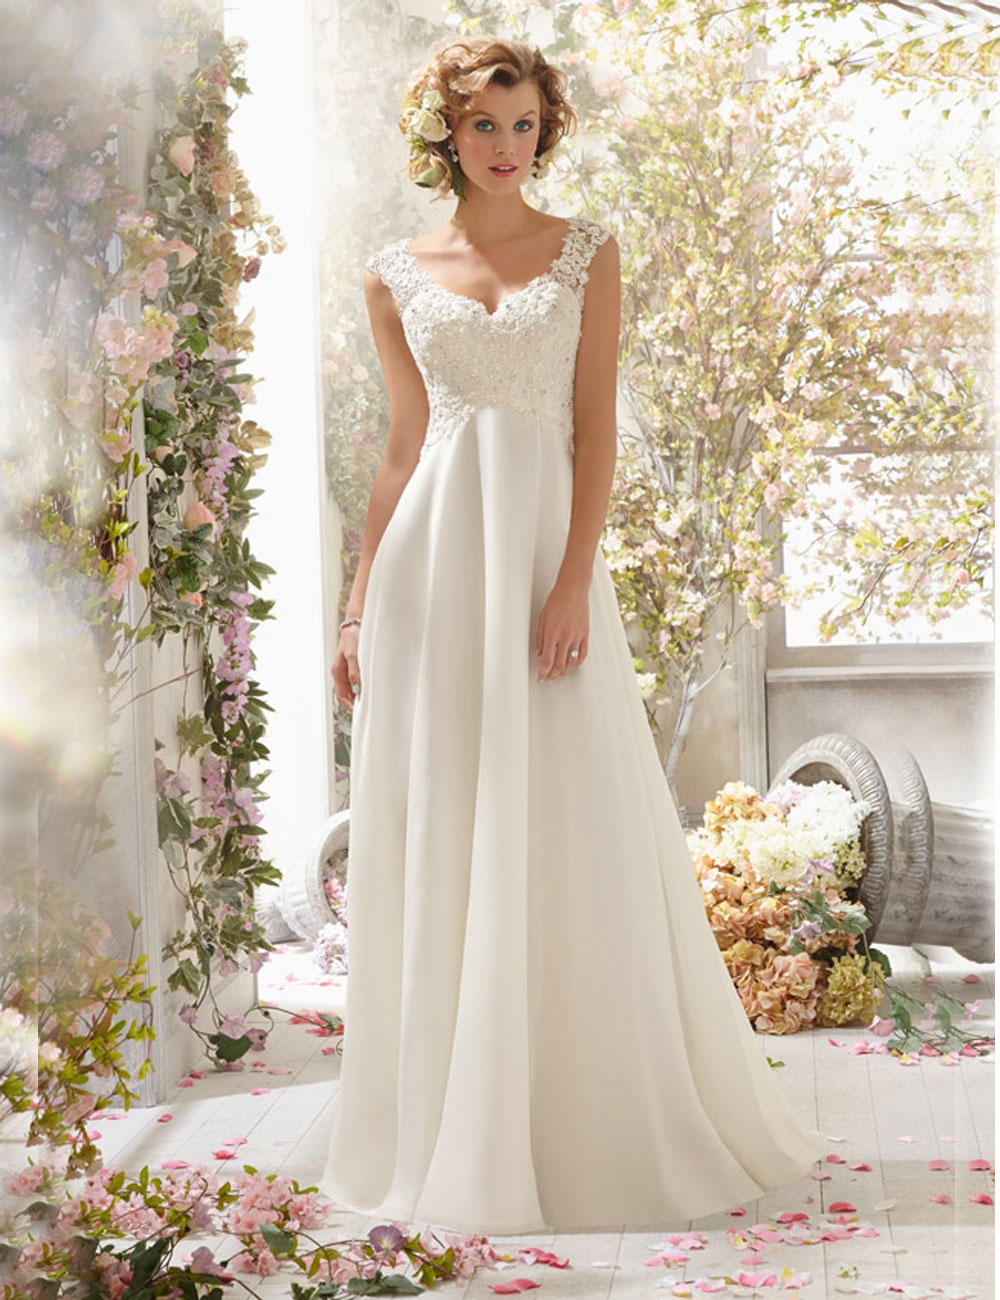 2016 New Fashionable A Line Cheap Sexy Bridal Dress Backless Appliqued Beaded Wedding Dress 2016 ...